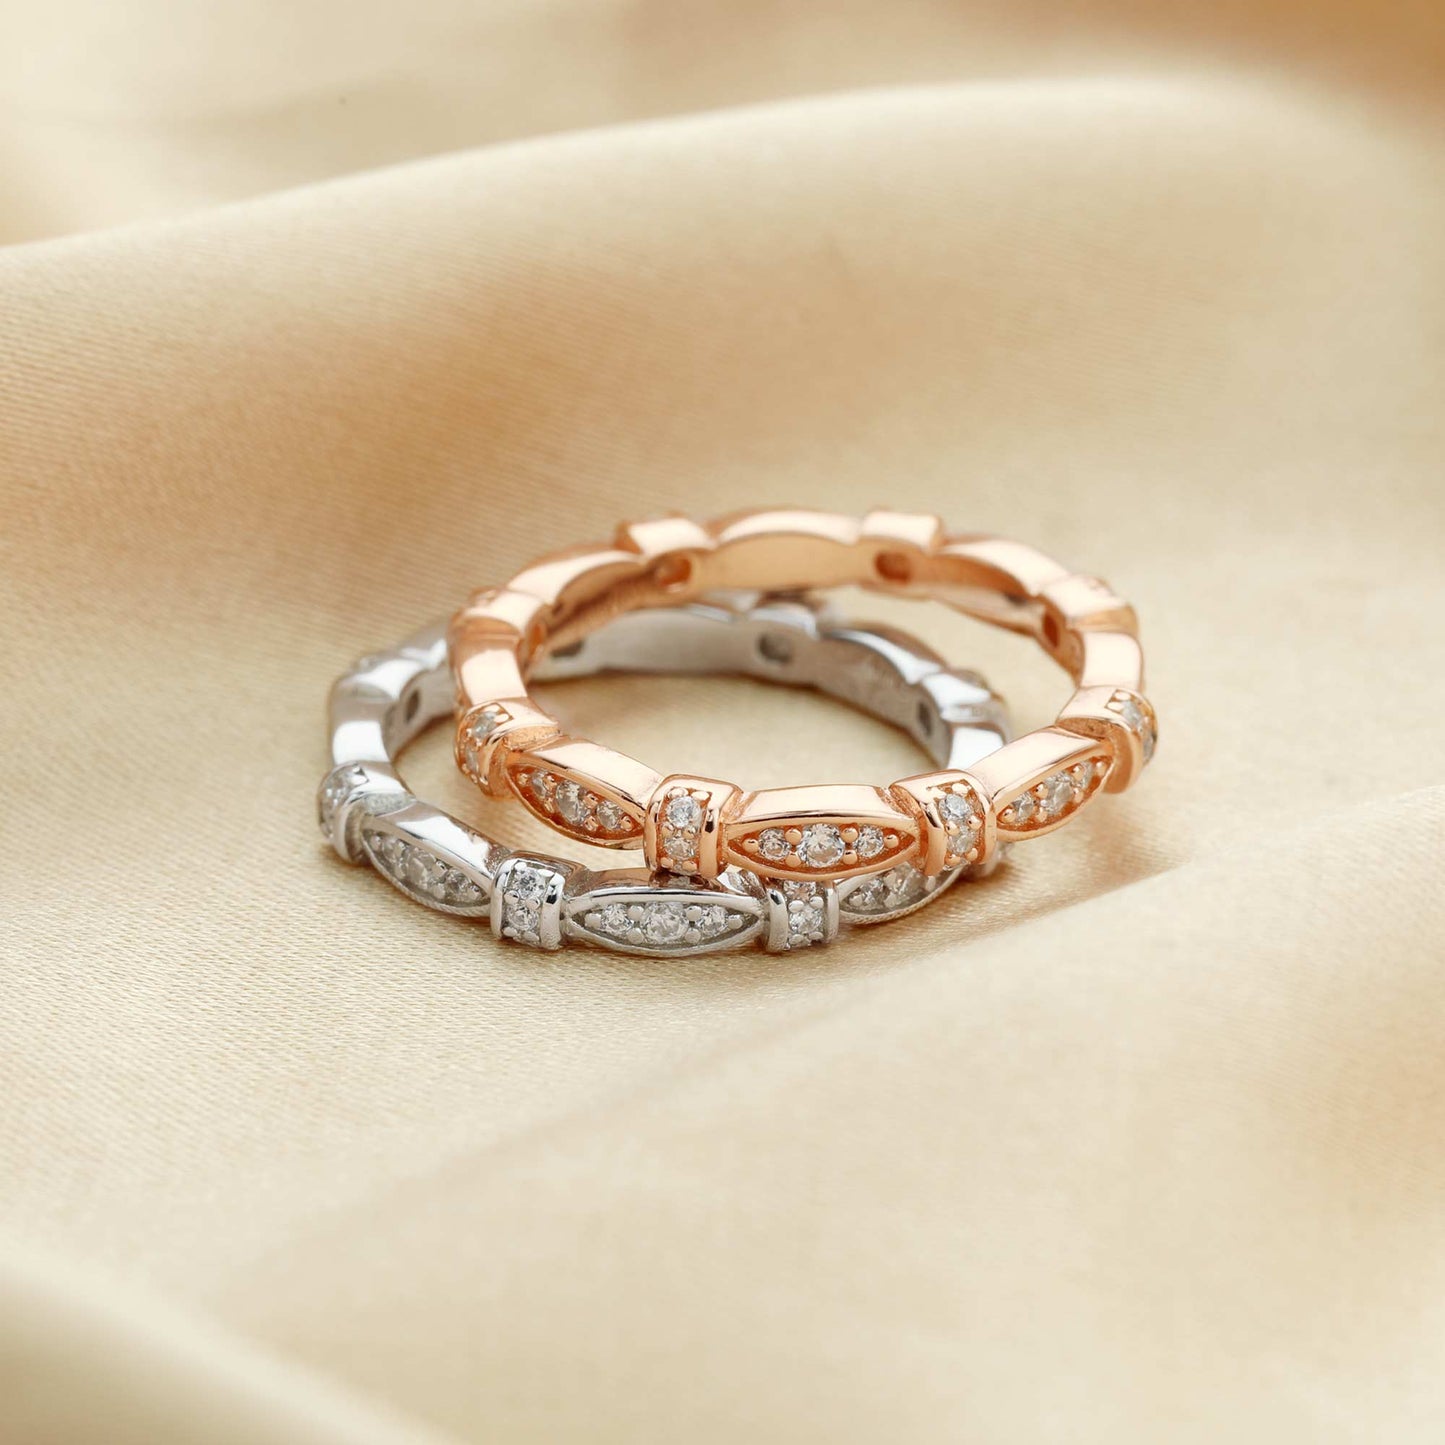 One silver and one rose gold ribbon scalloped style ring set with clear small gems.